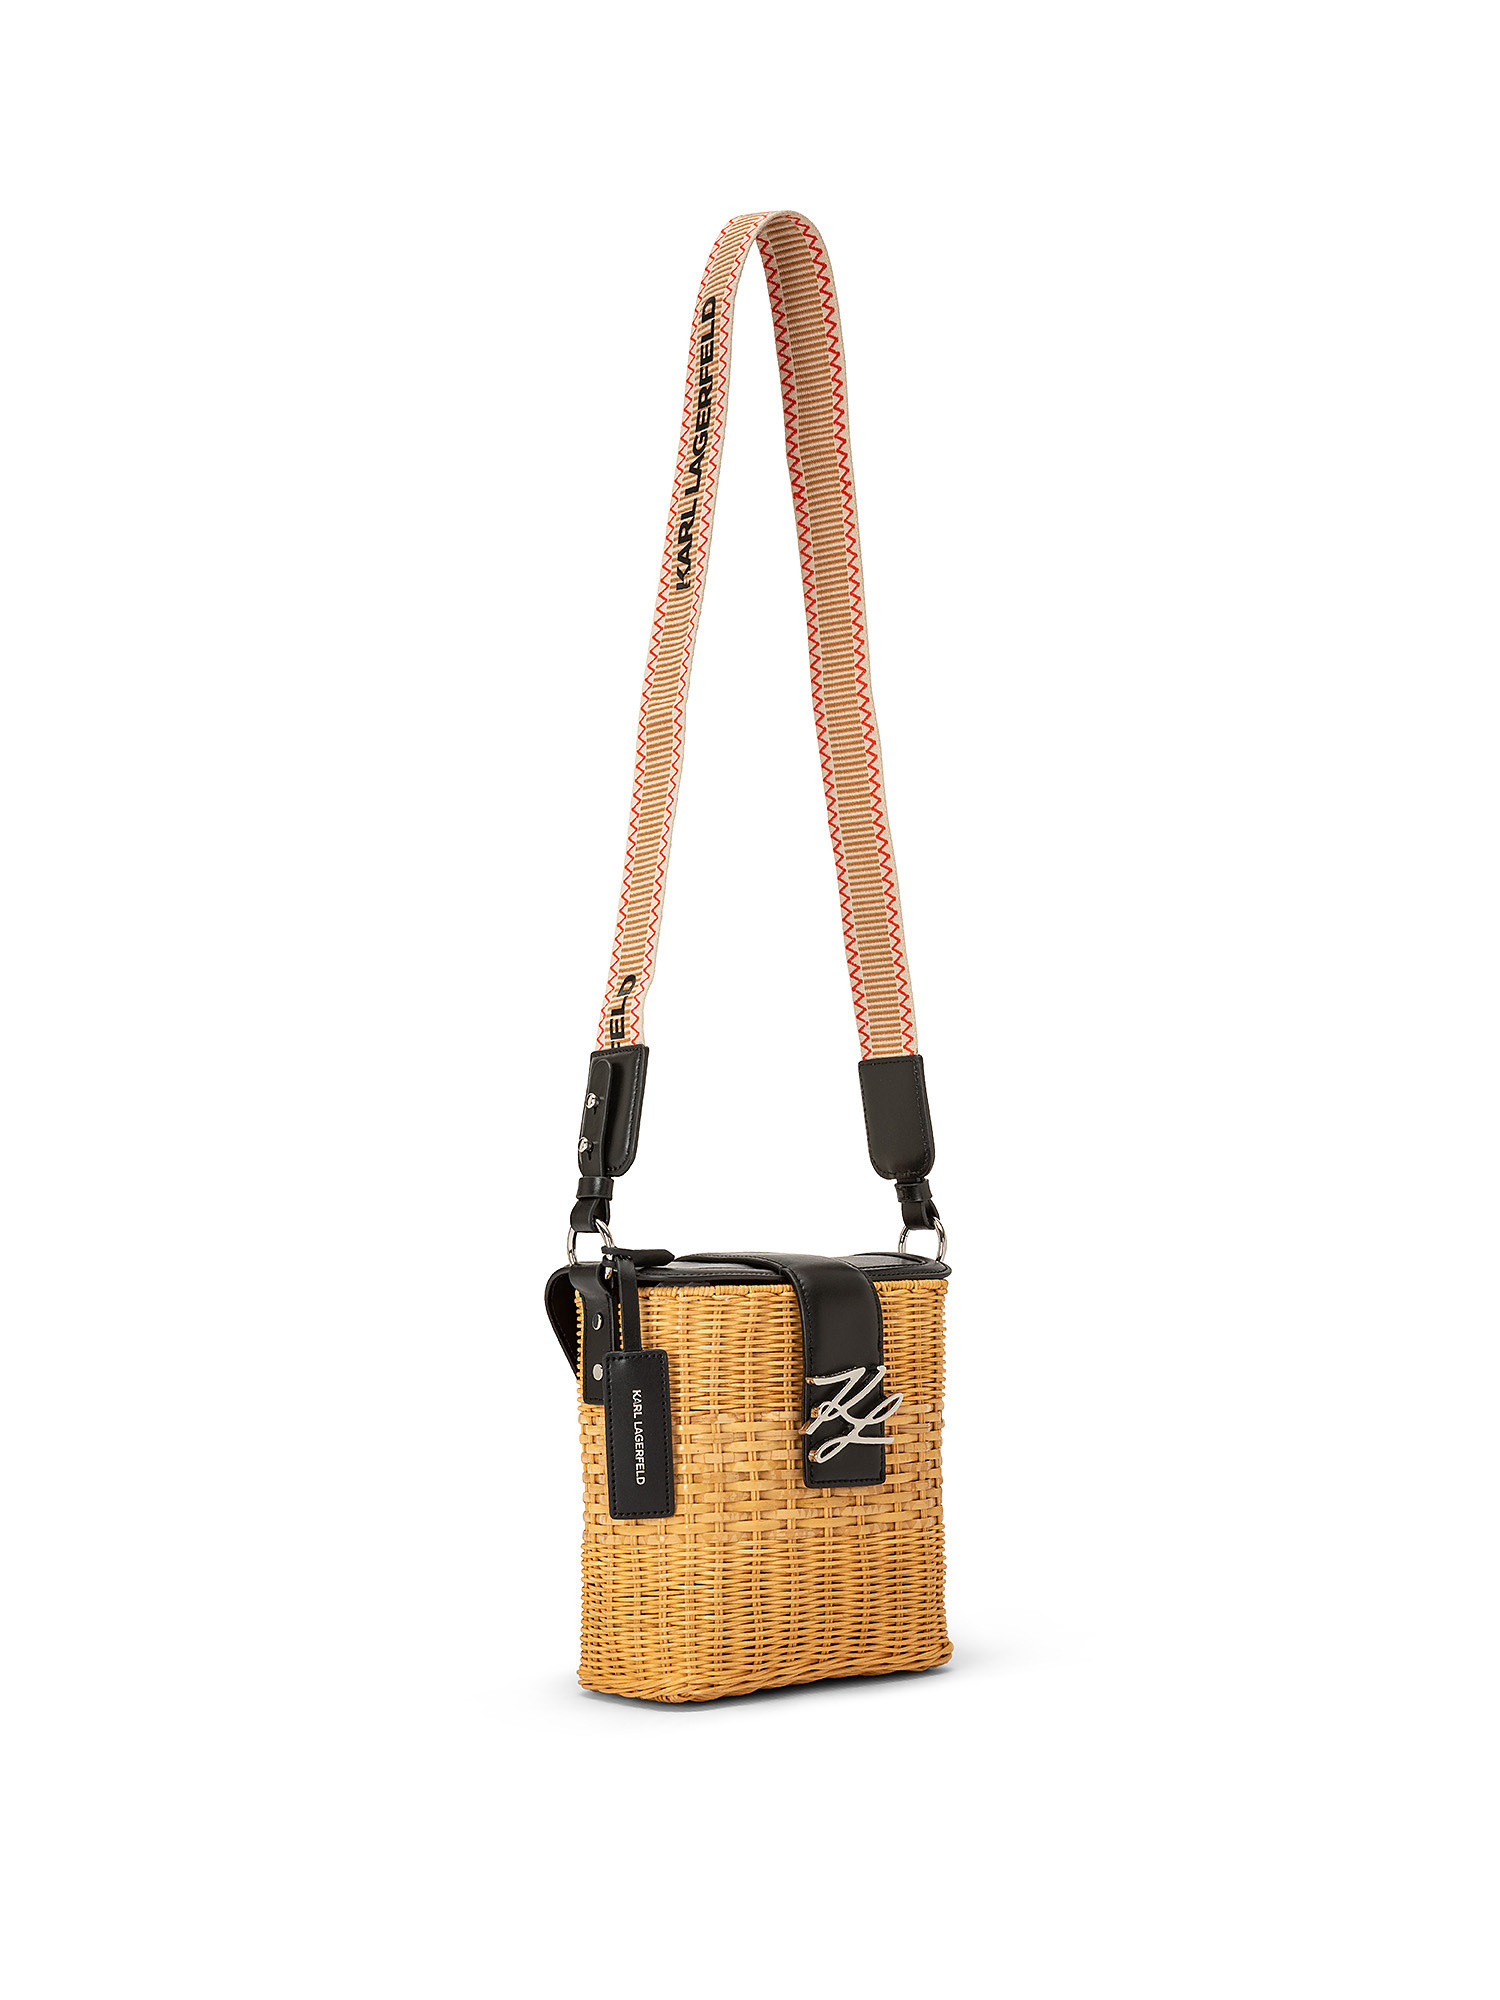 Autograph wicker crossbody, Black, large image number 1